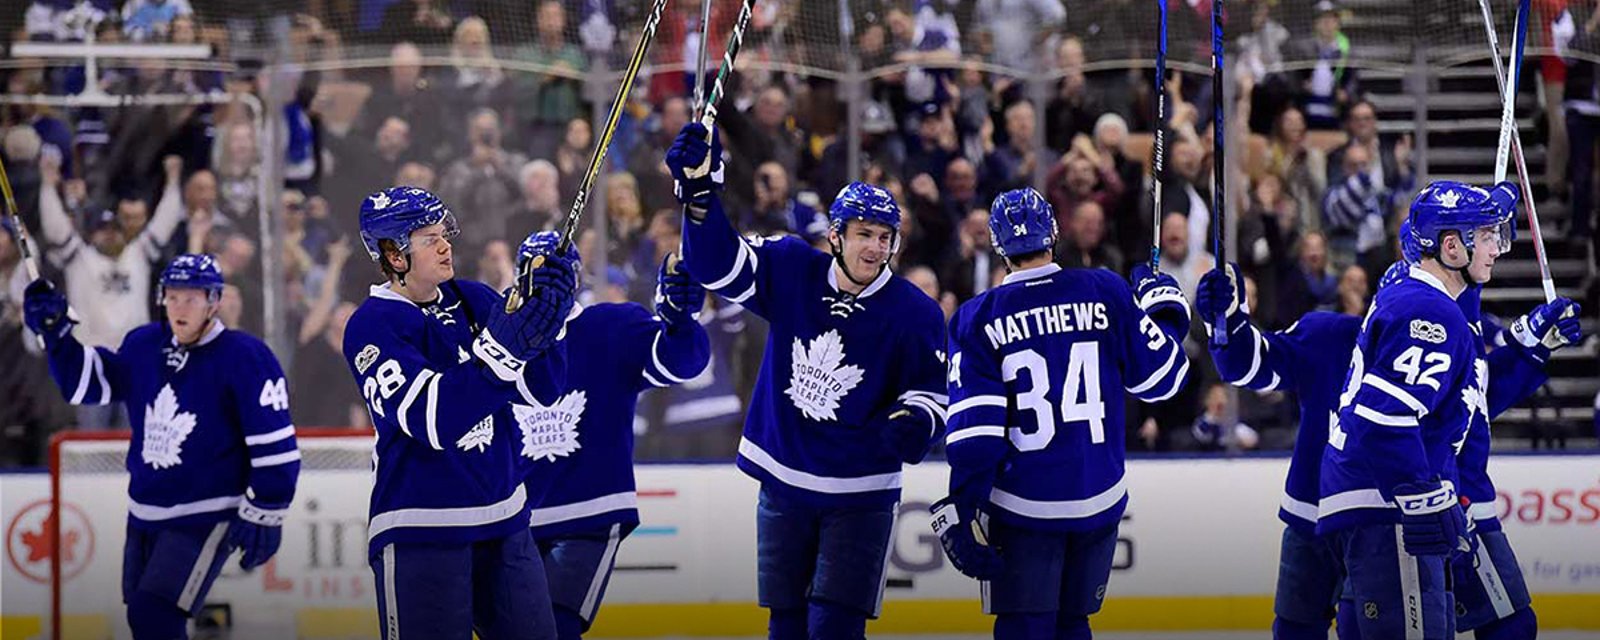 Report: Huge indicator that Leafs on pace for insane season